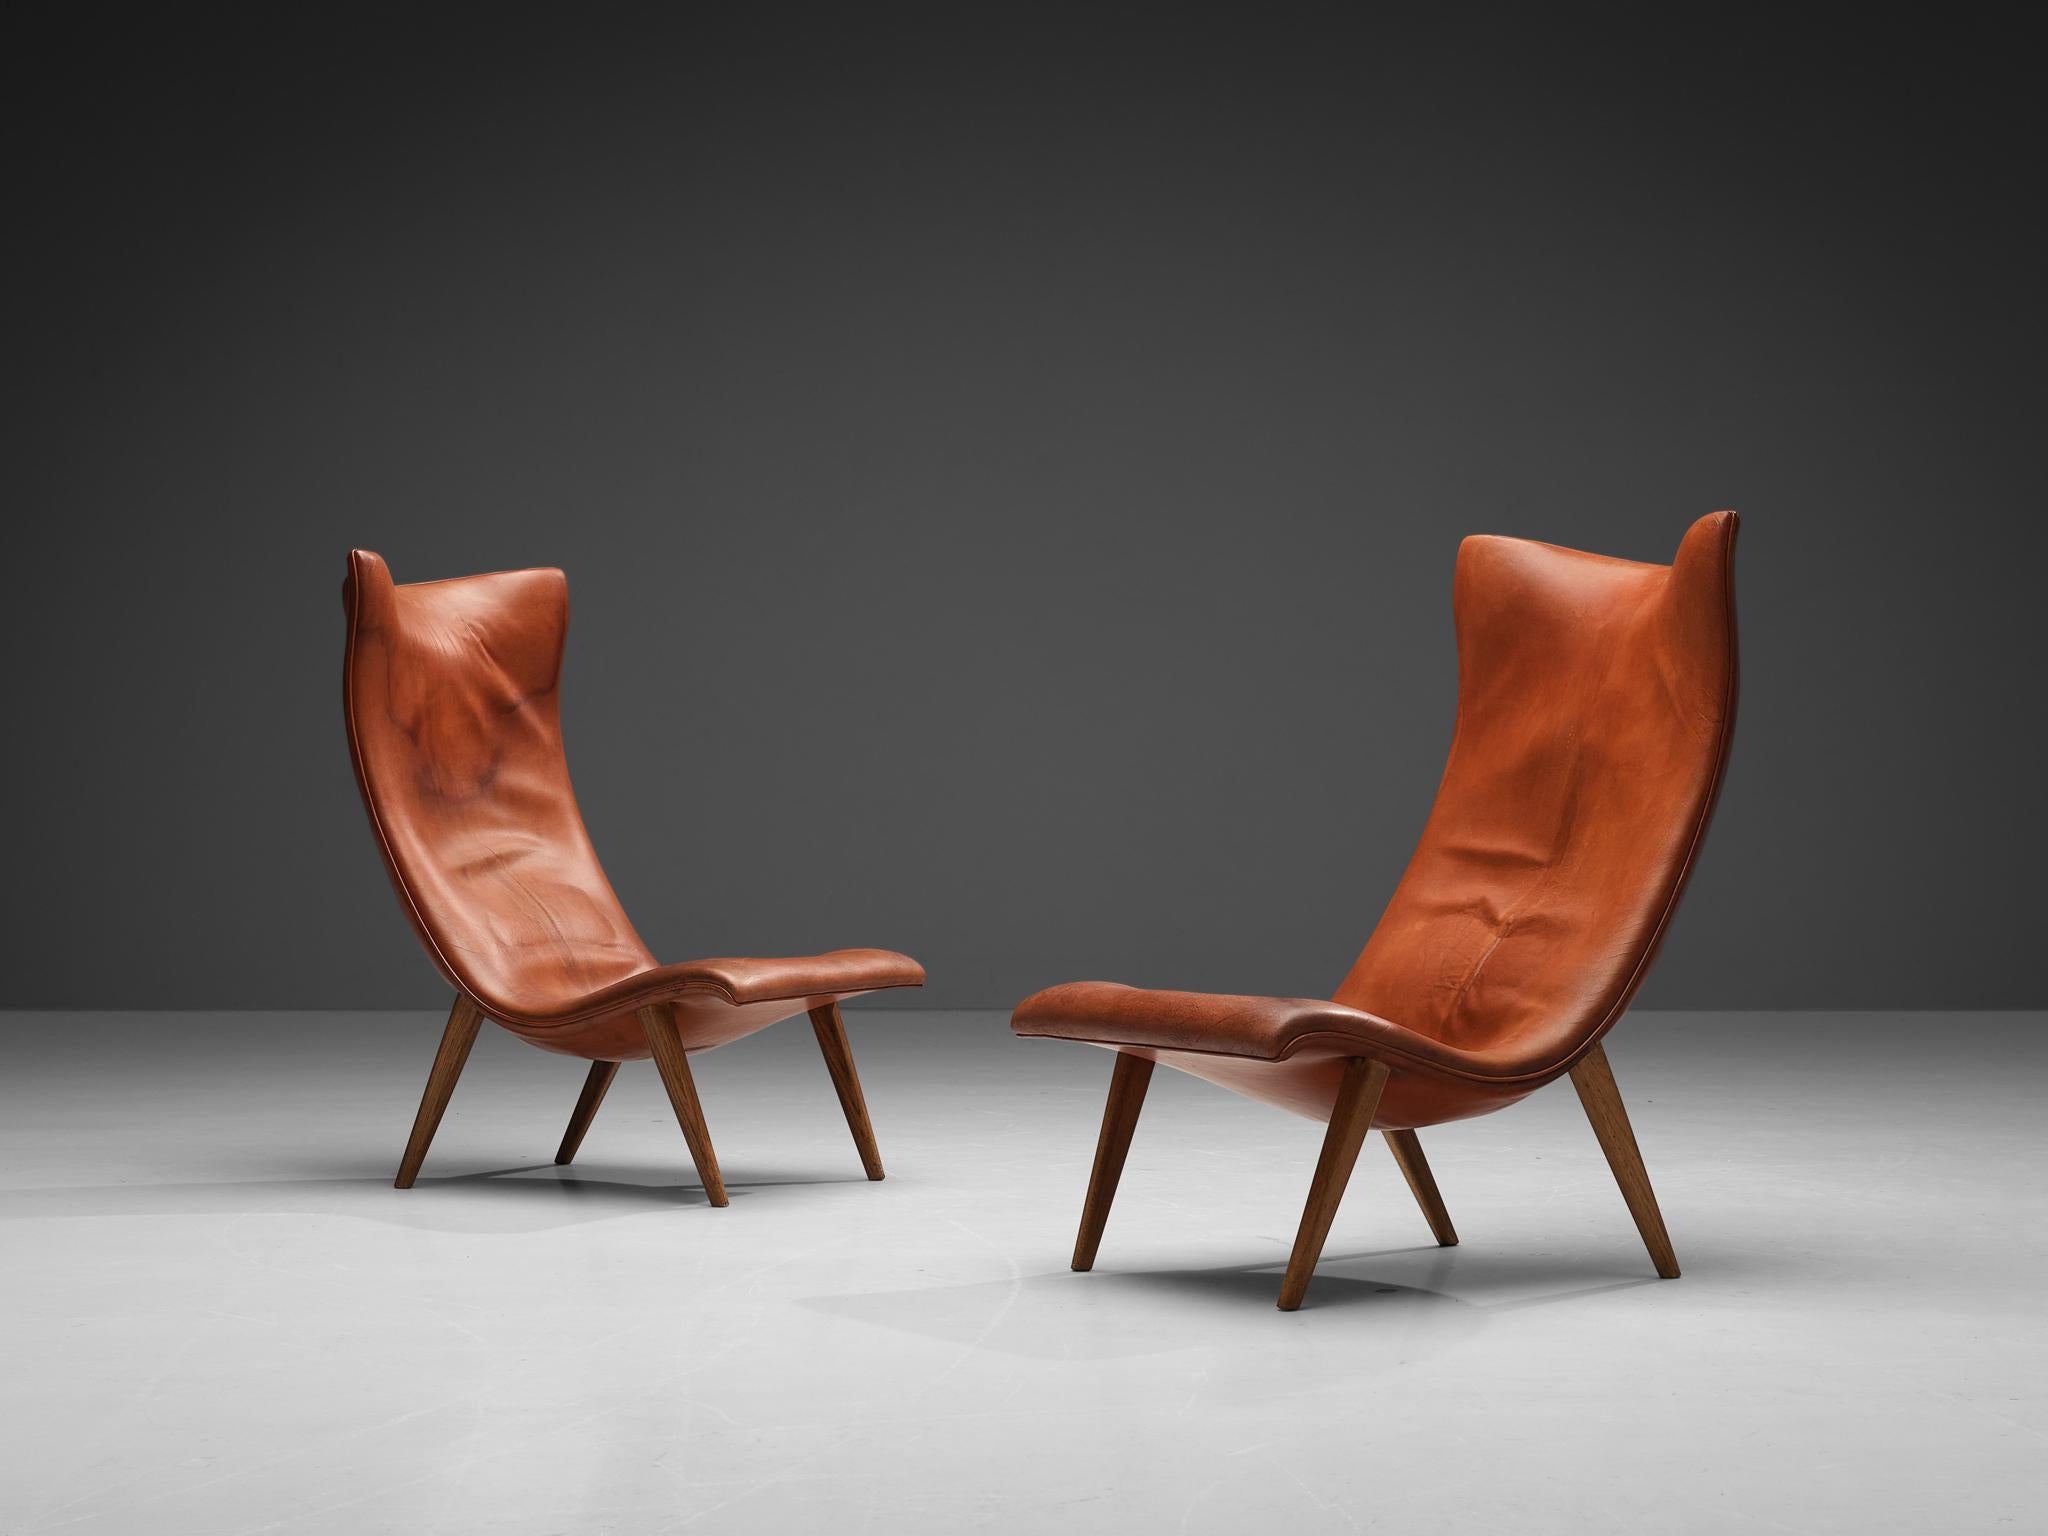 Frits Henningsen, lounge chairs, oak, original leather, Denmark, 1950s

These two most rare lounge chairs by Danish designer and cabinetmaker Frits Henningsen feature highly elegant, organic lines. A stunning combination of round forms and clear